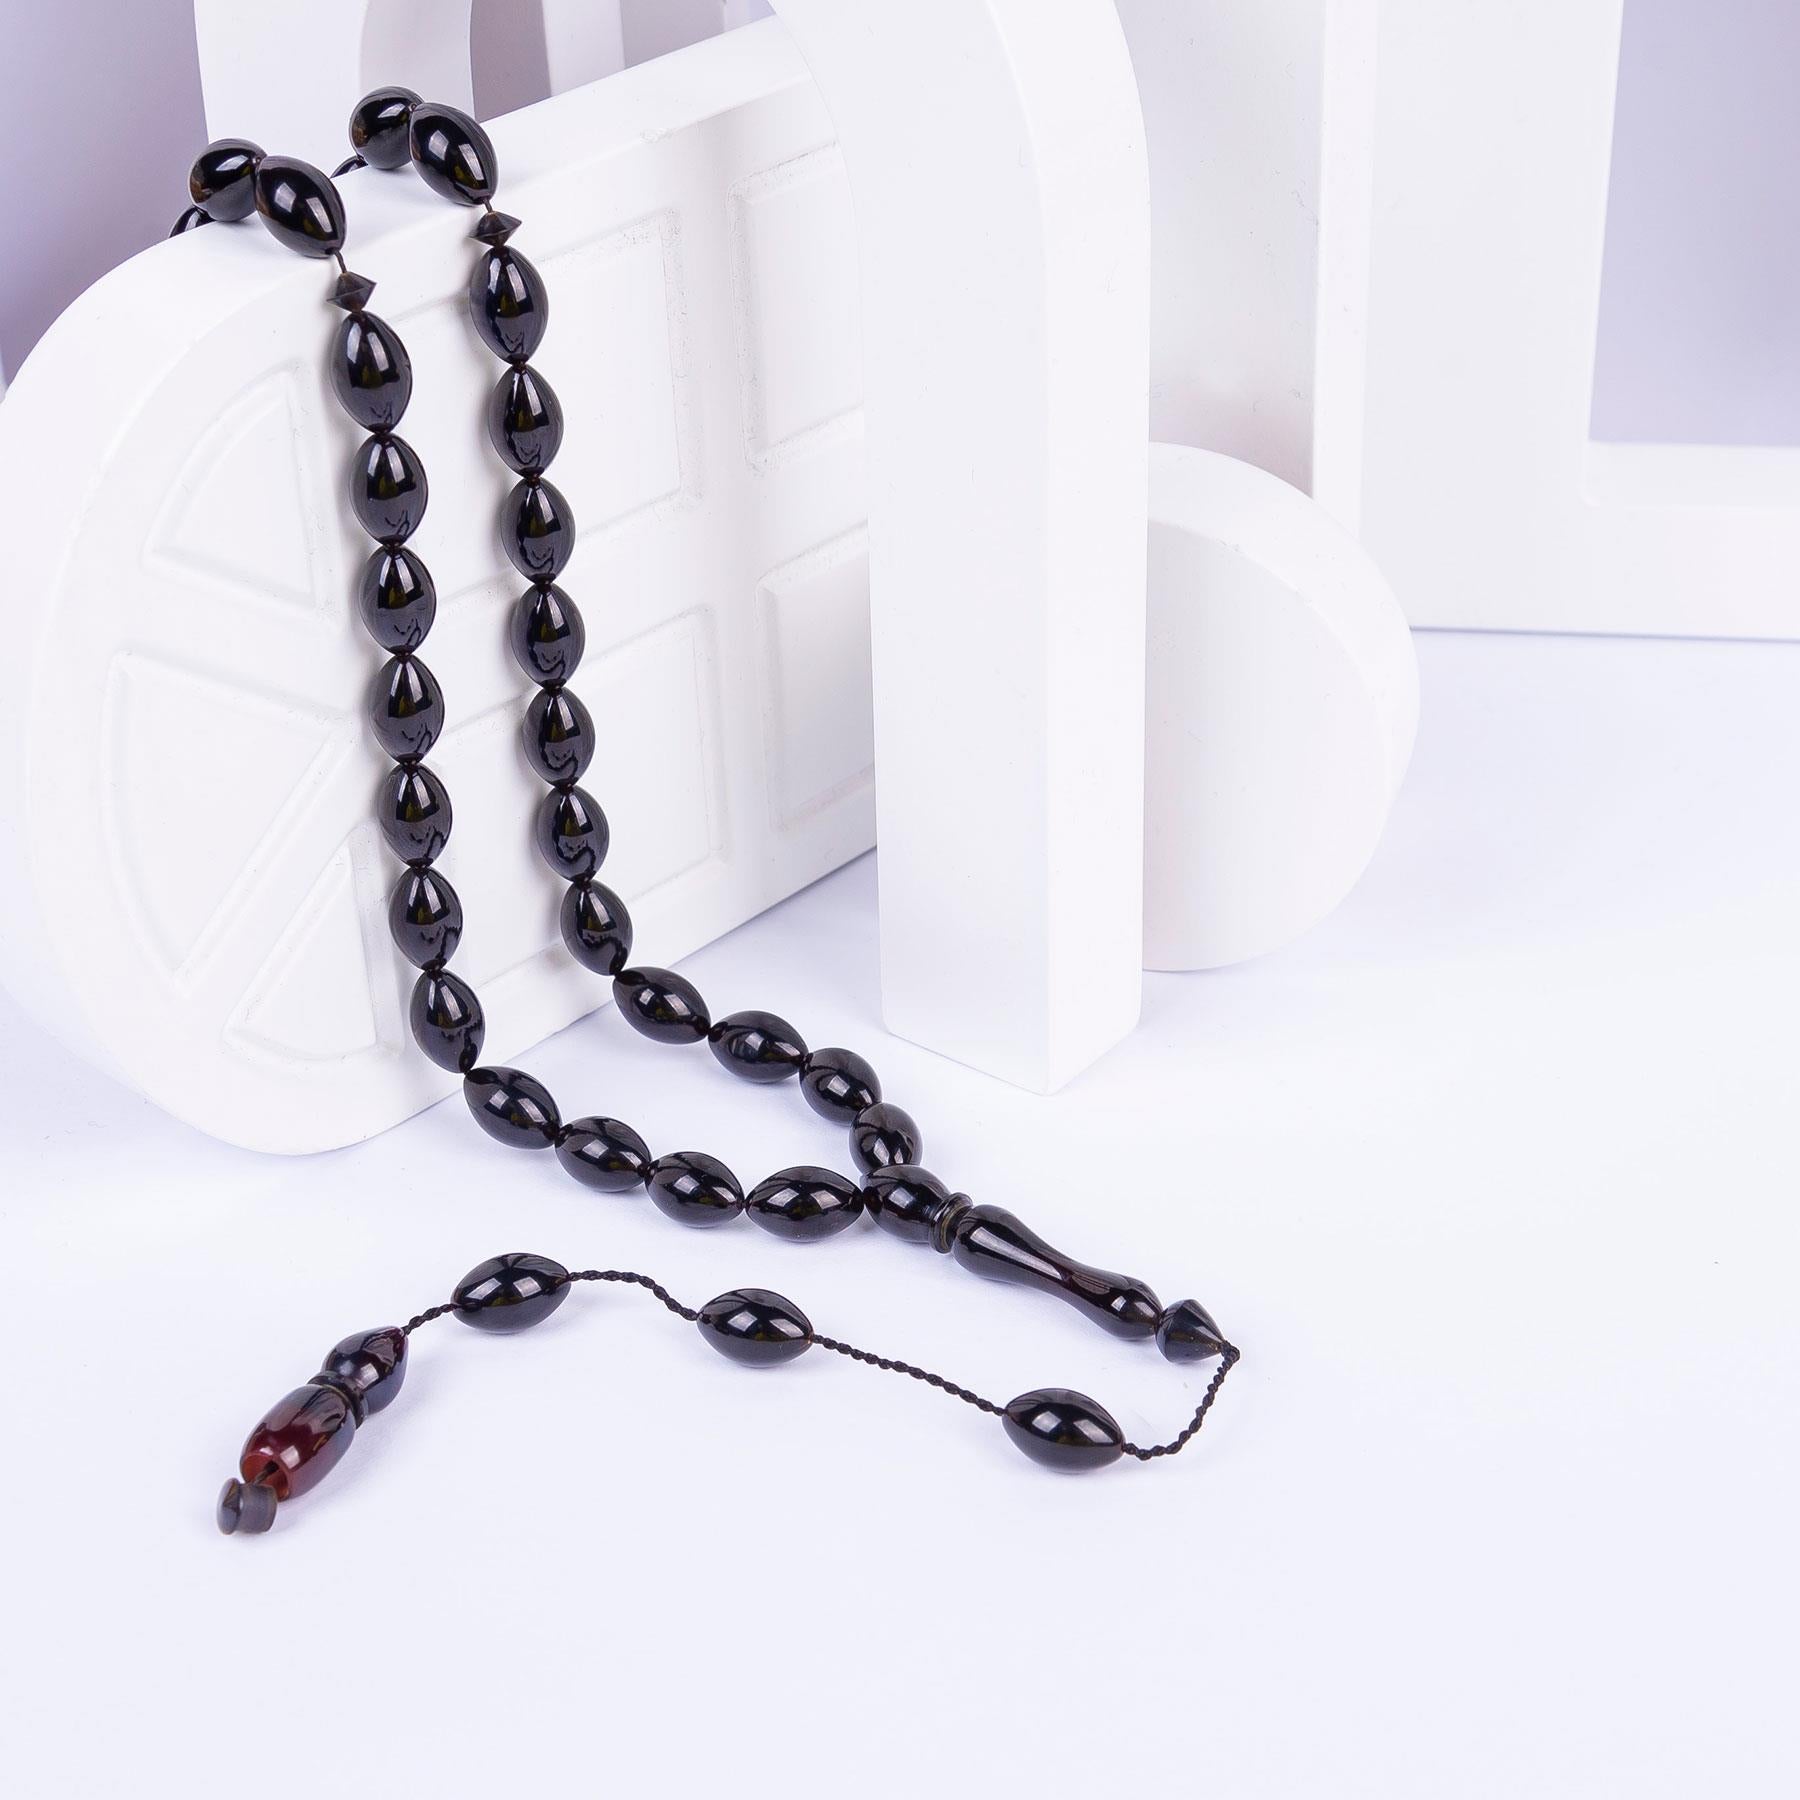 Systematic Solid Cut and Pressed Amber Prayer Beads 2